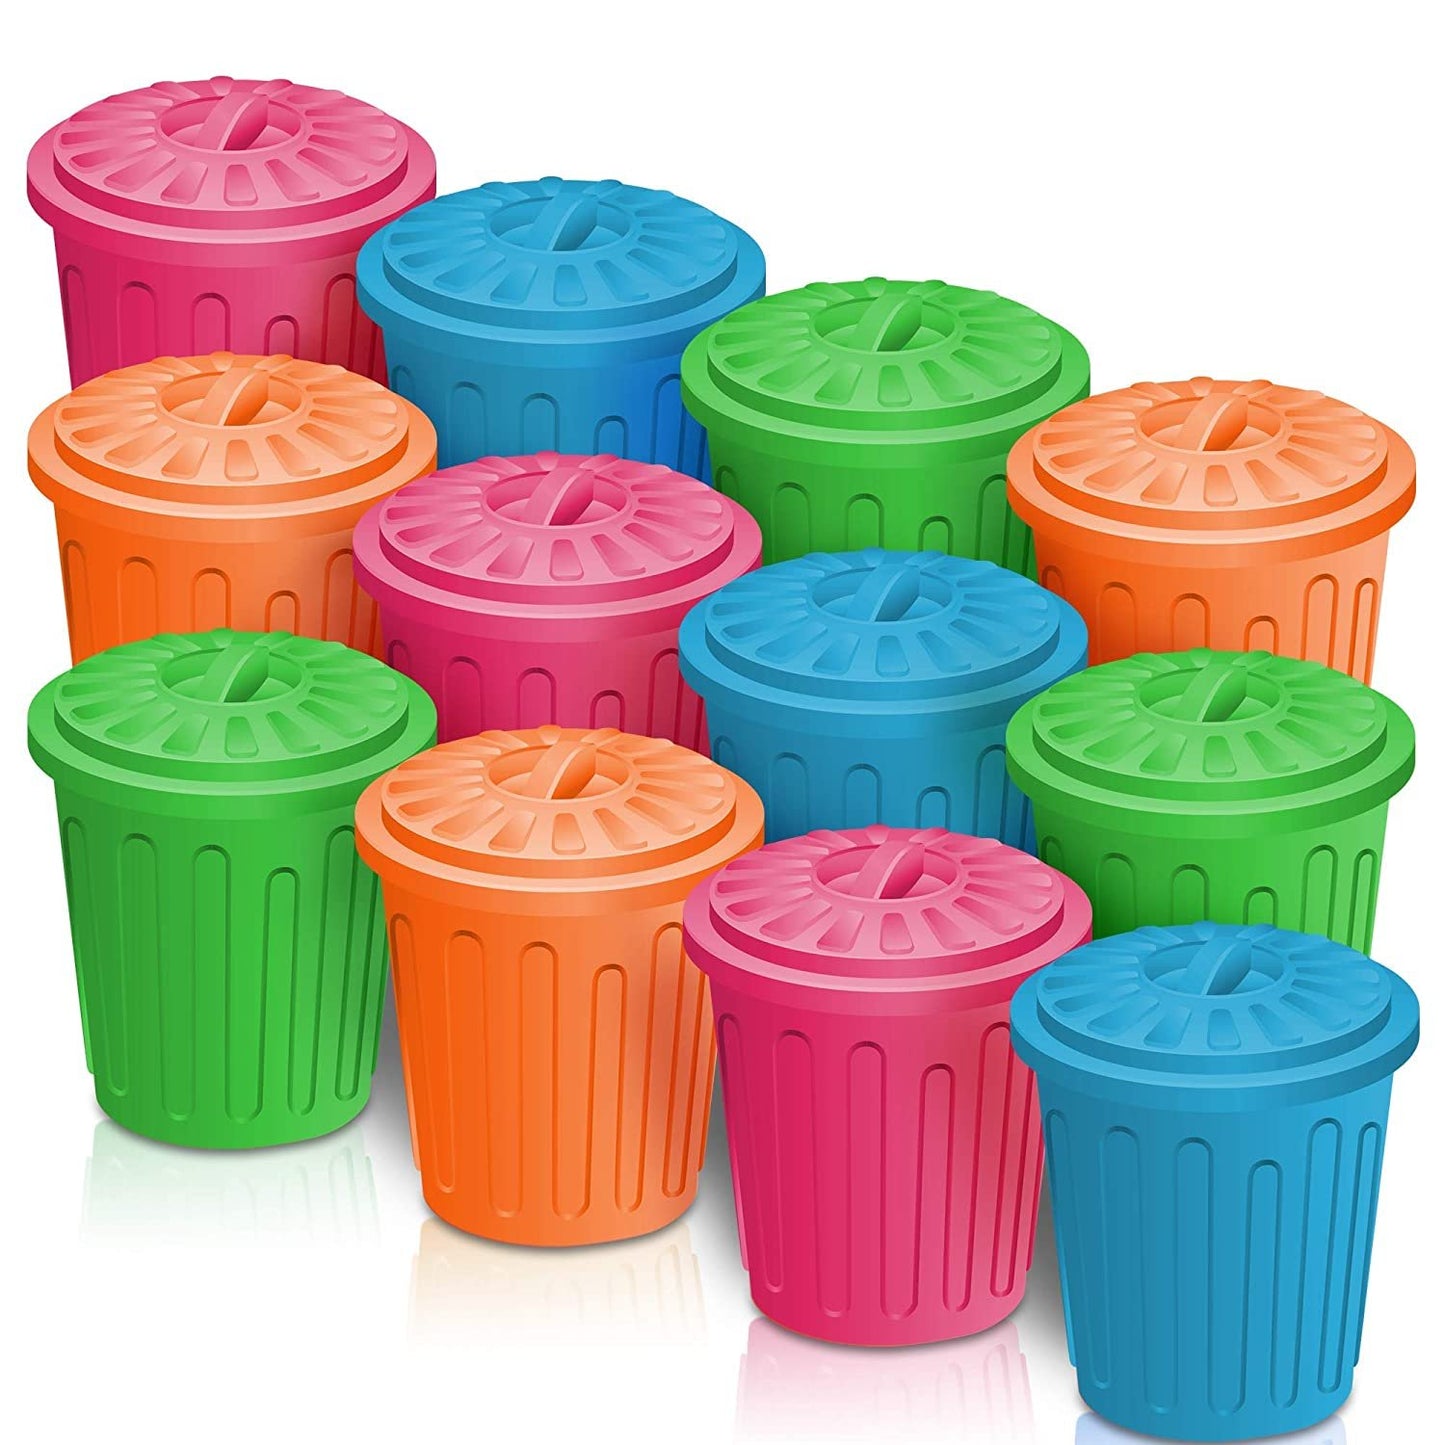 ArtCreativity 4.5 Inch Mini Trash Can Set - 12 Pack - Miniature Garbage Bin Toy in Assorted Colors - Unique Desk Organizer - Birthday Party Favors for Boys and Girls, Classroom Decor, Carnival Prize